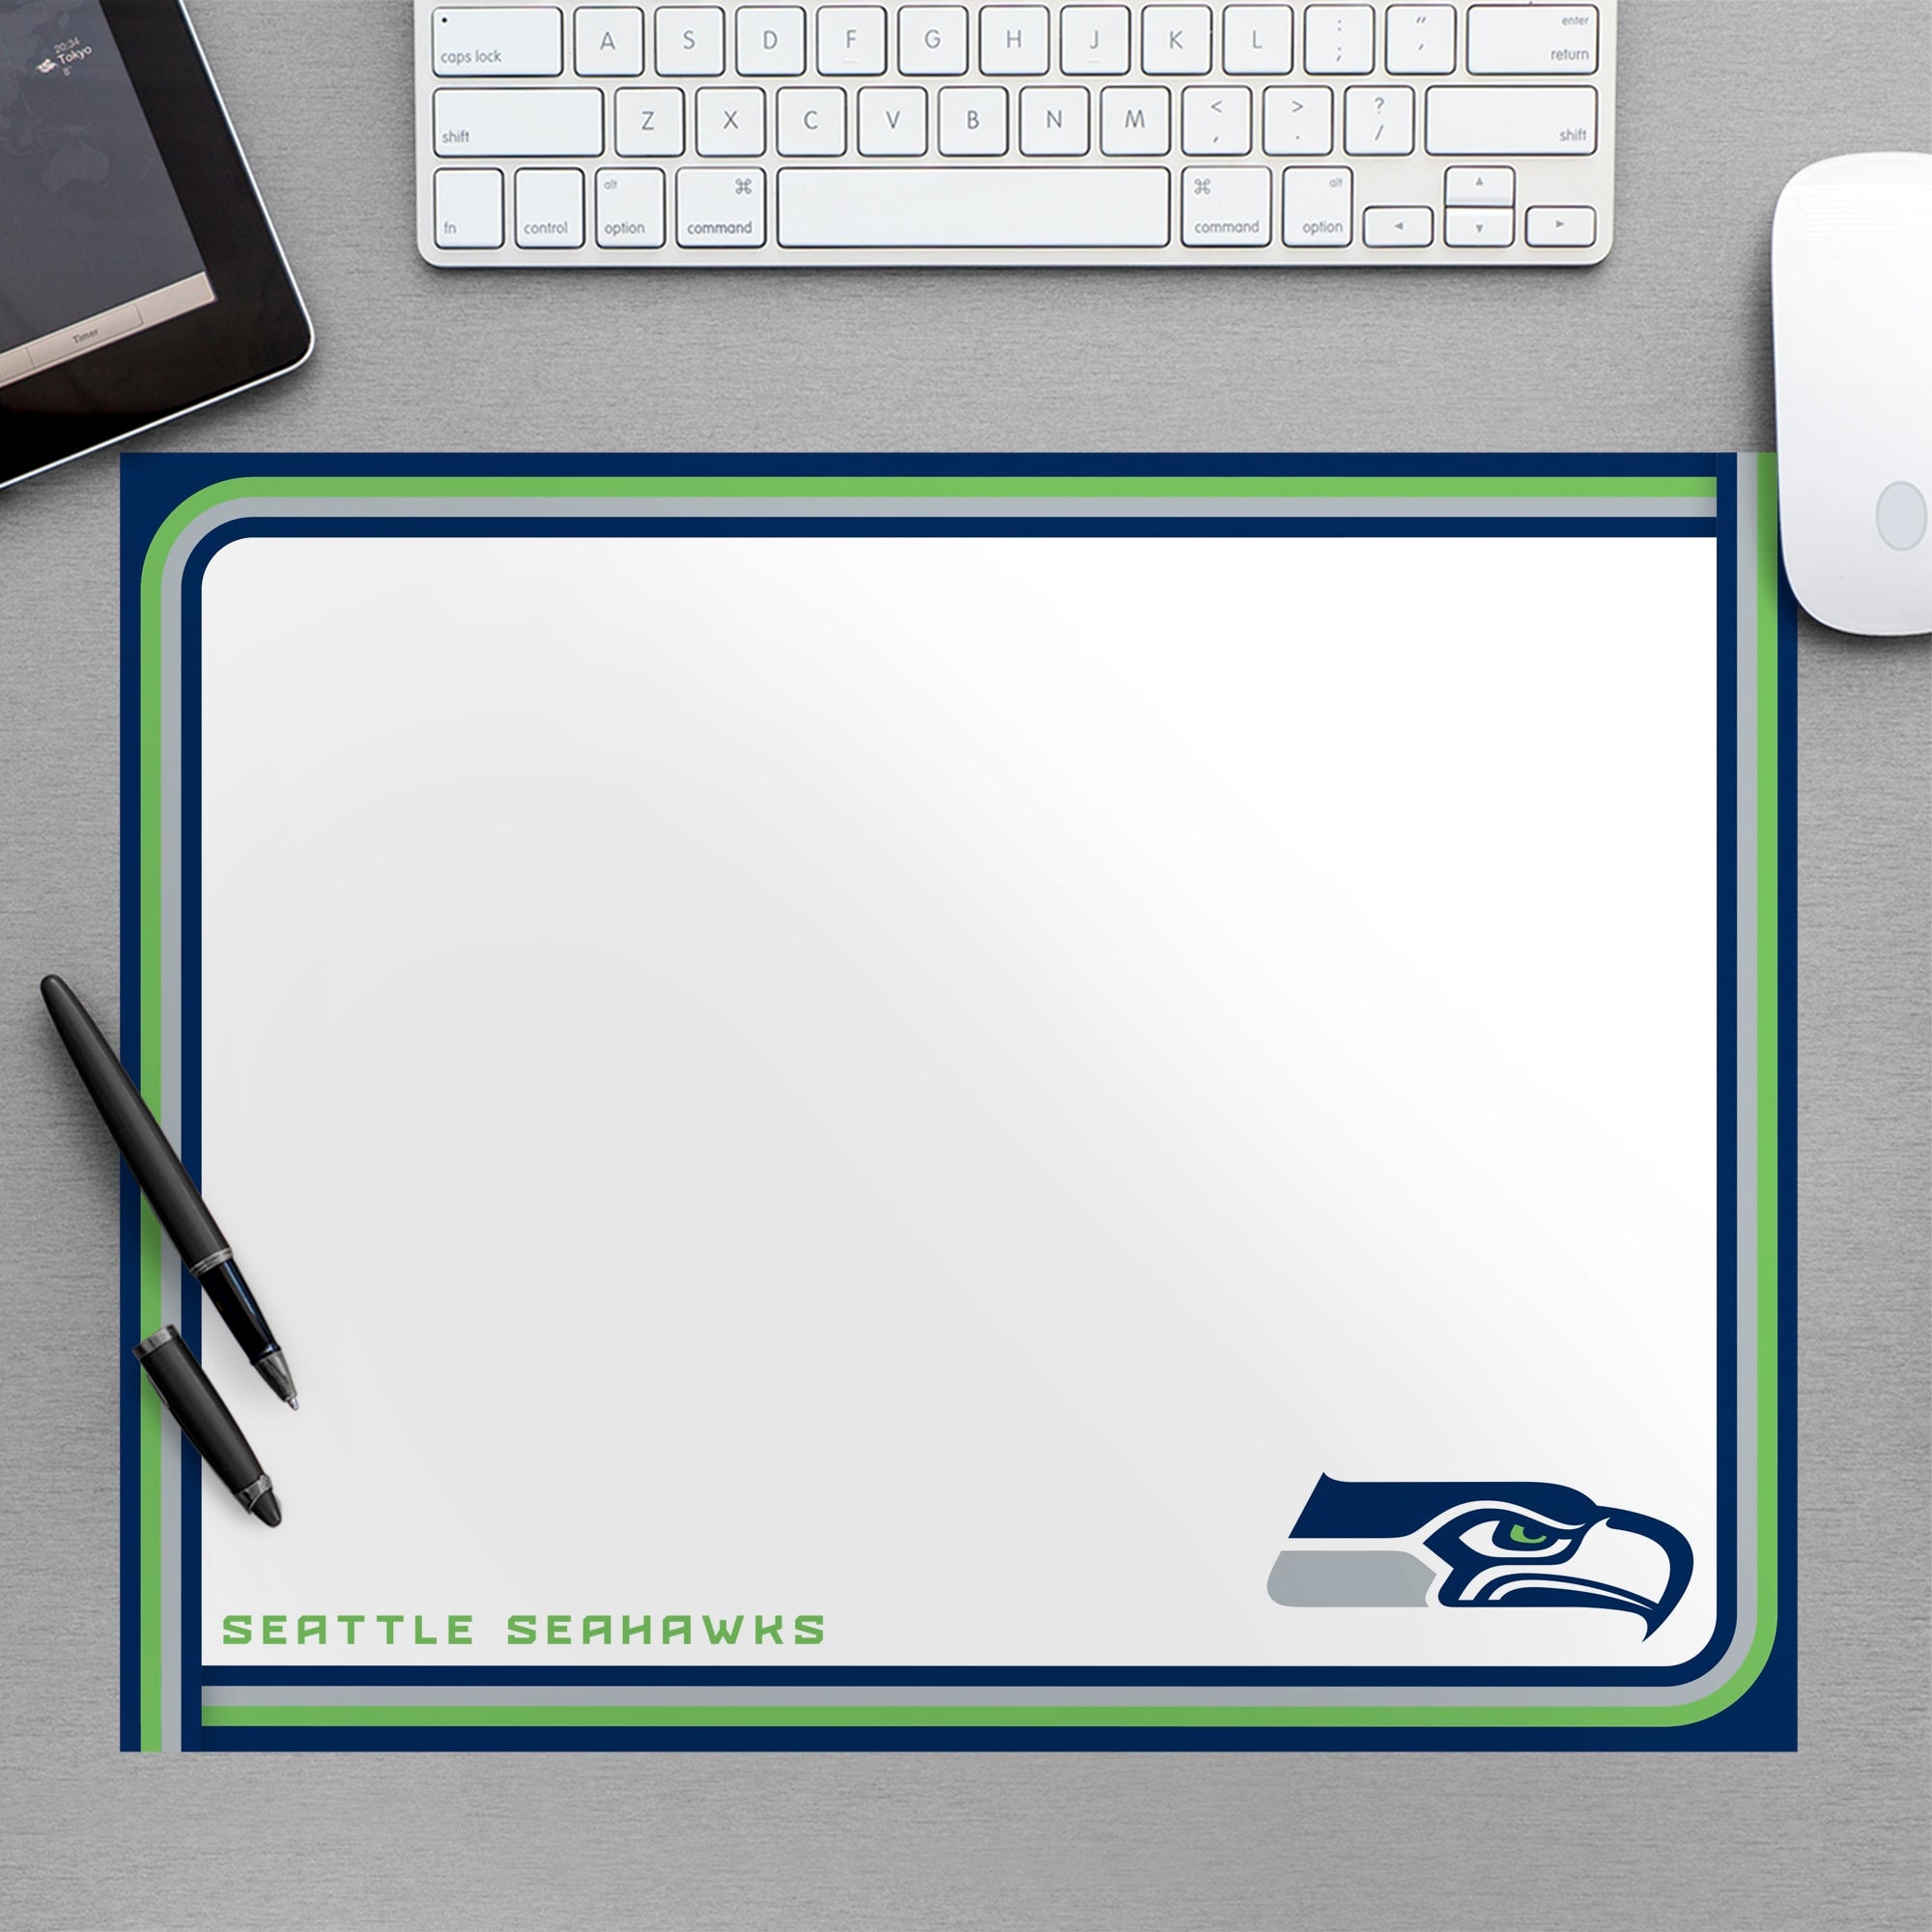 Seattle Seahawks: Dry Erase Whiteboard - Officially Licensed NFL Removable Wall Decal Large by Fathead | Vinyl